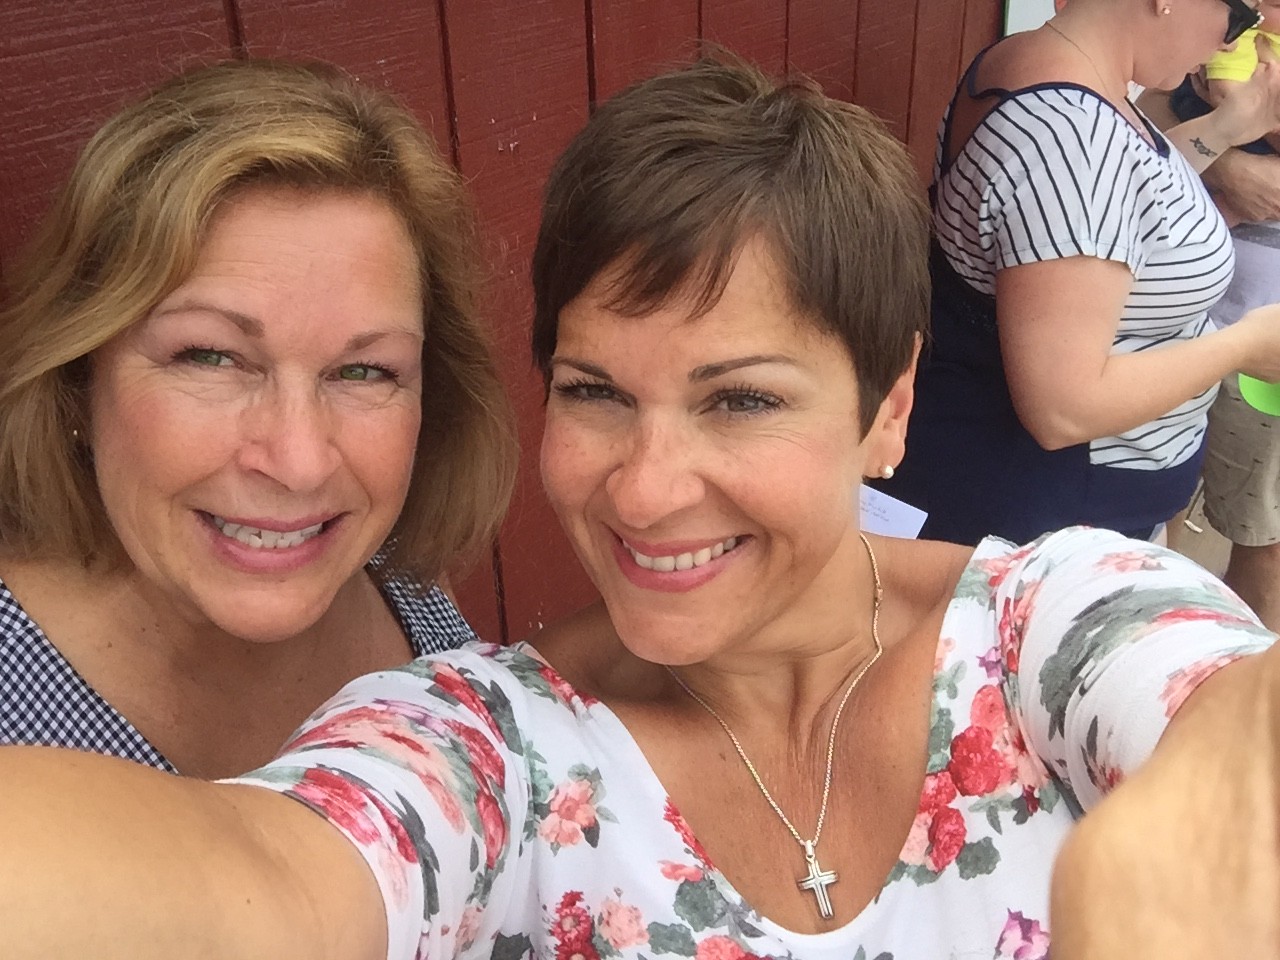 Lou and Sandy snapping a selfie at an outdoor music festival.